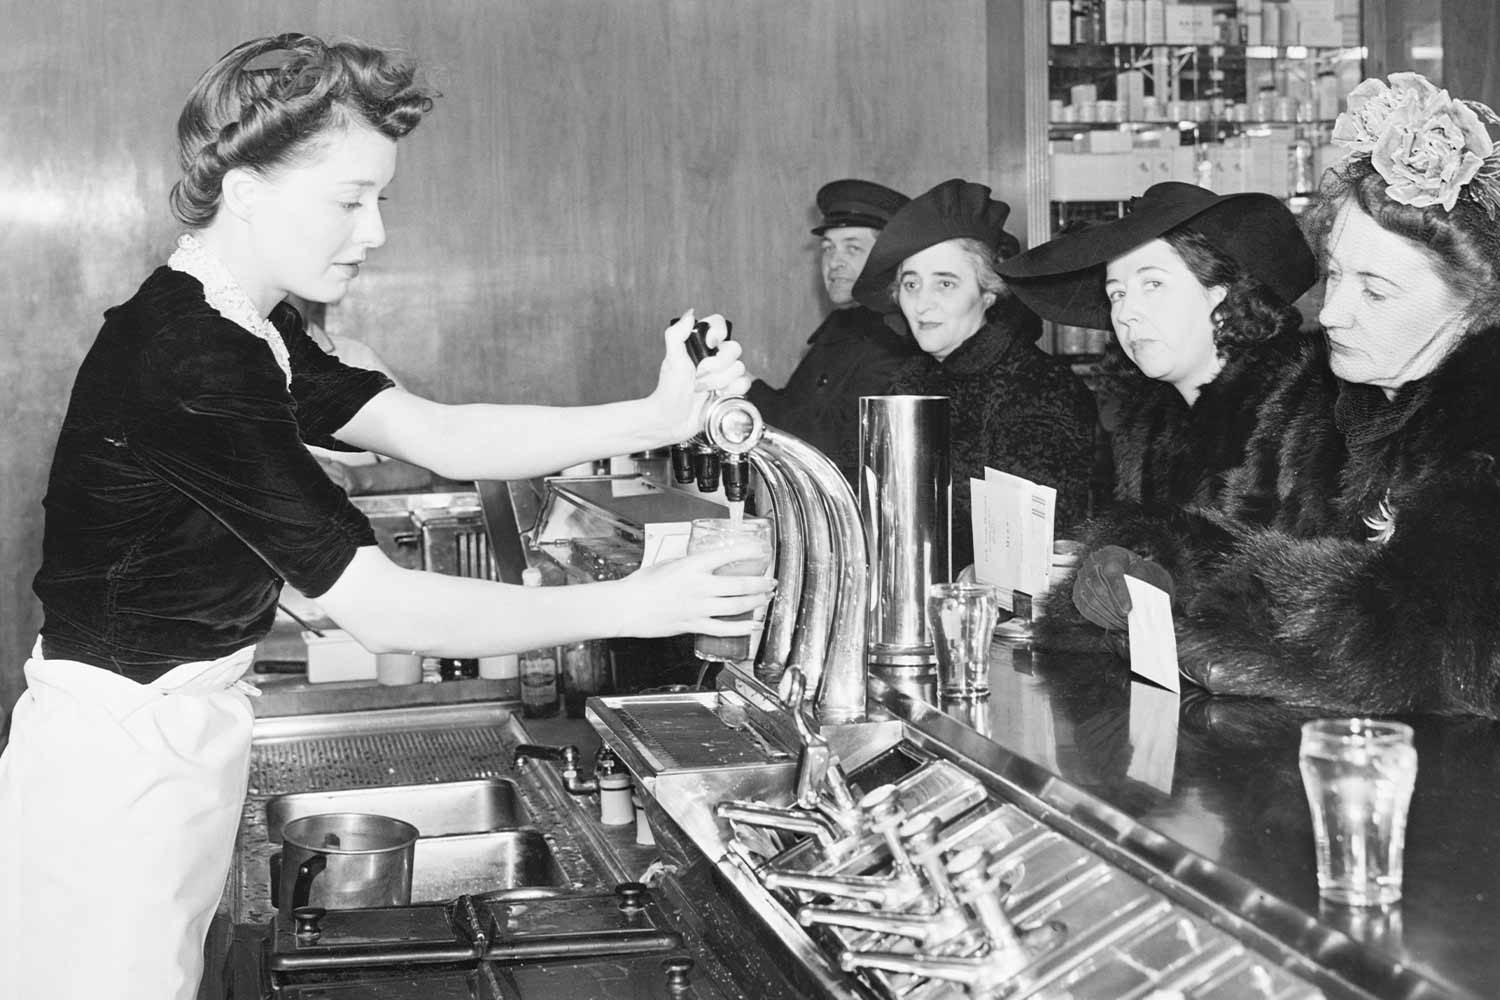 One woman serving milkshakes, and three women and a man seated at a milkshake bar, depicted in black and white. 